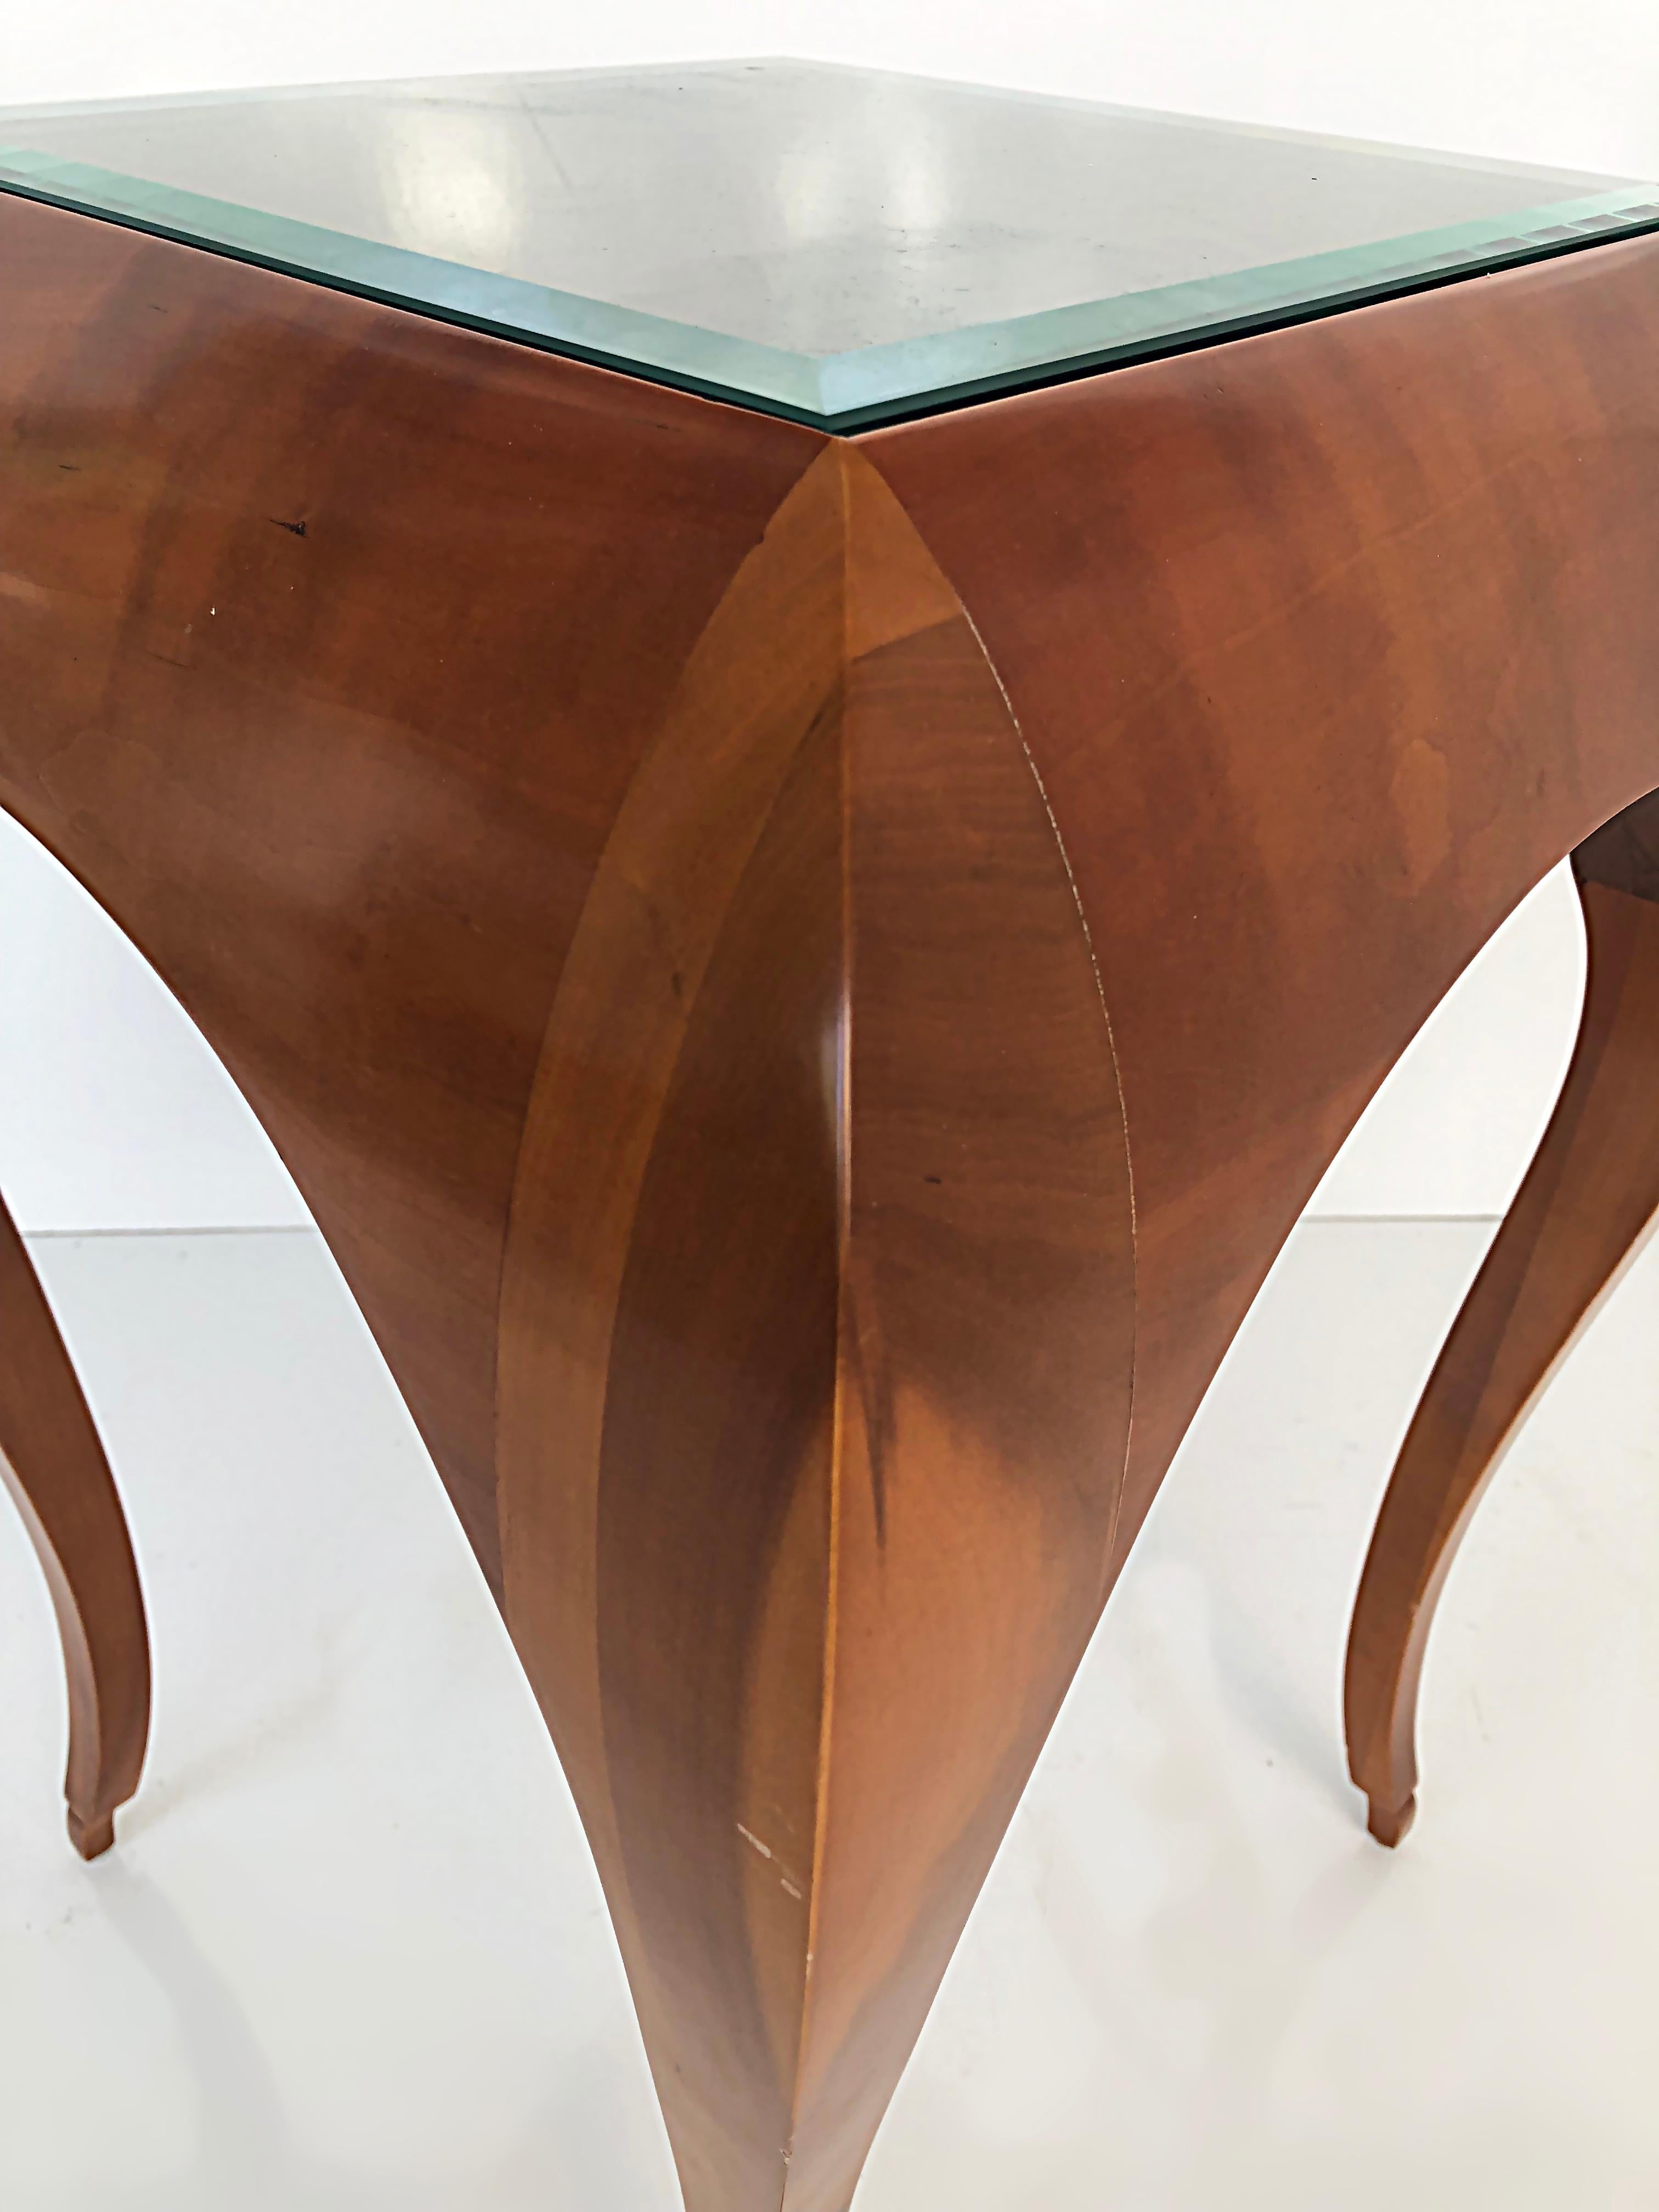 20th Century Stylized Curved Wood Side Tables, Manner of René Prou